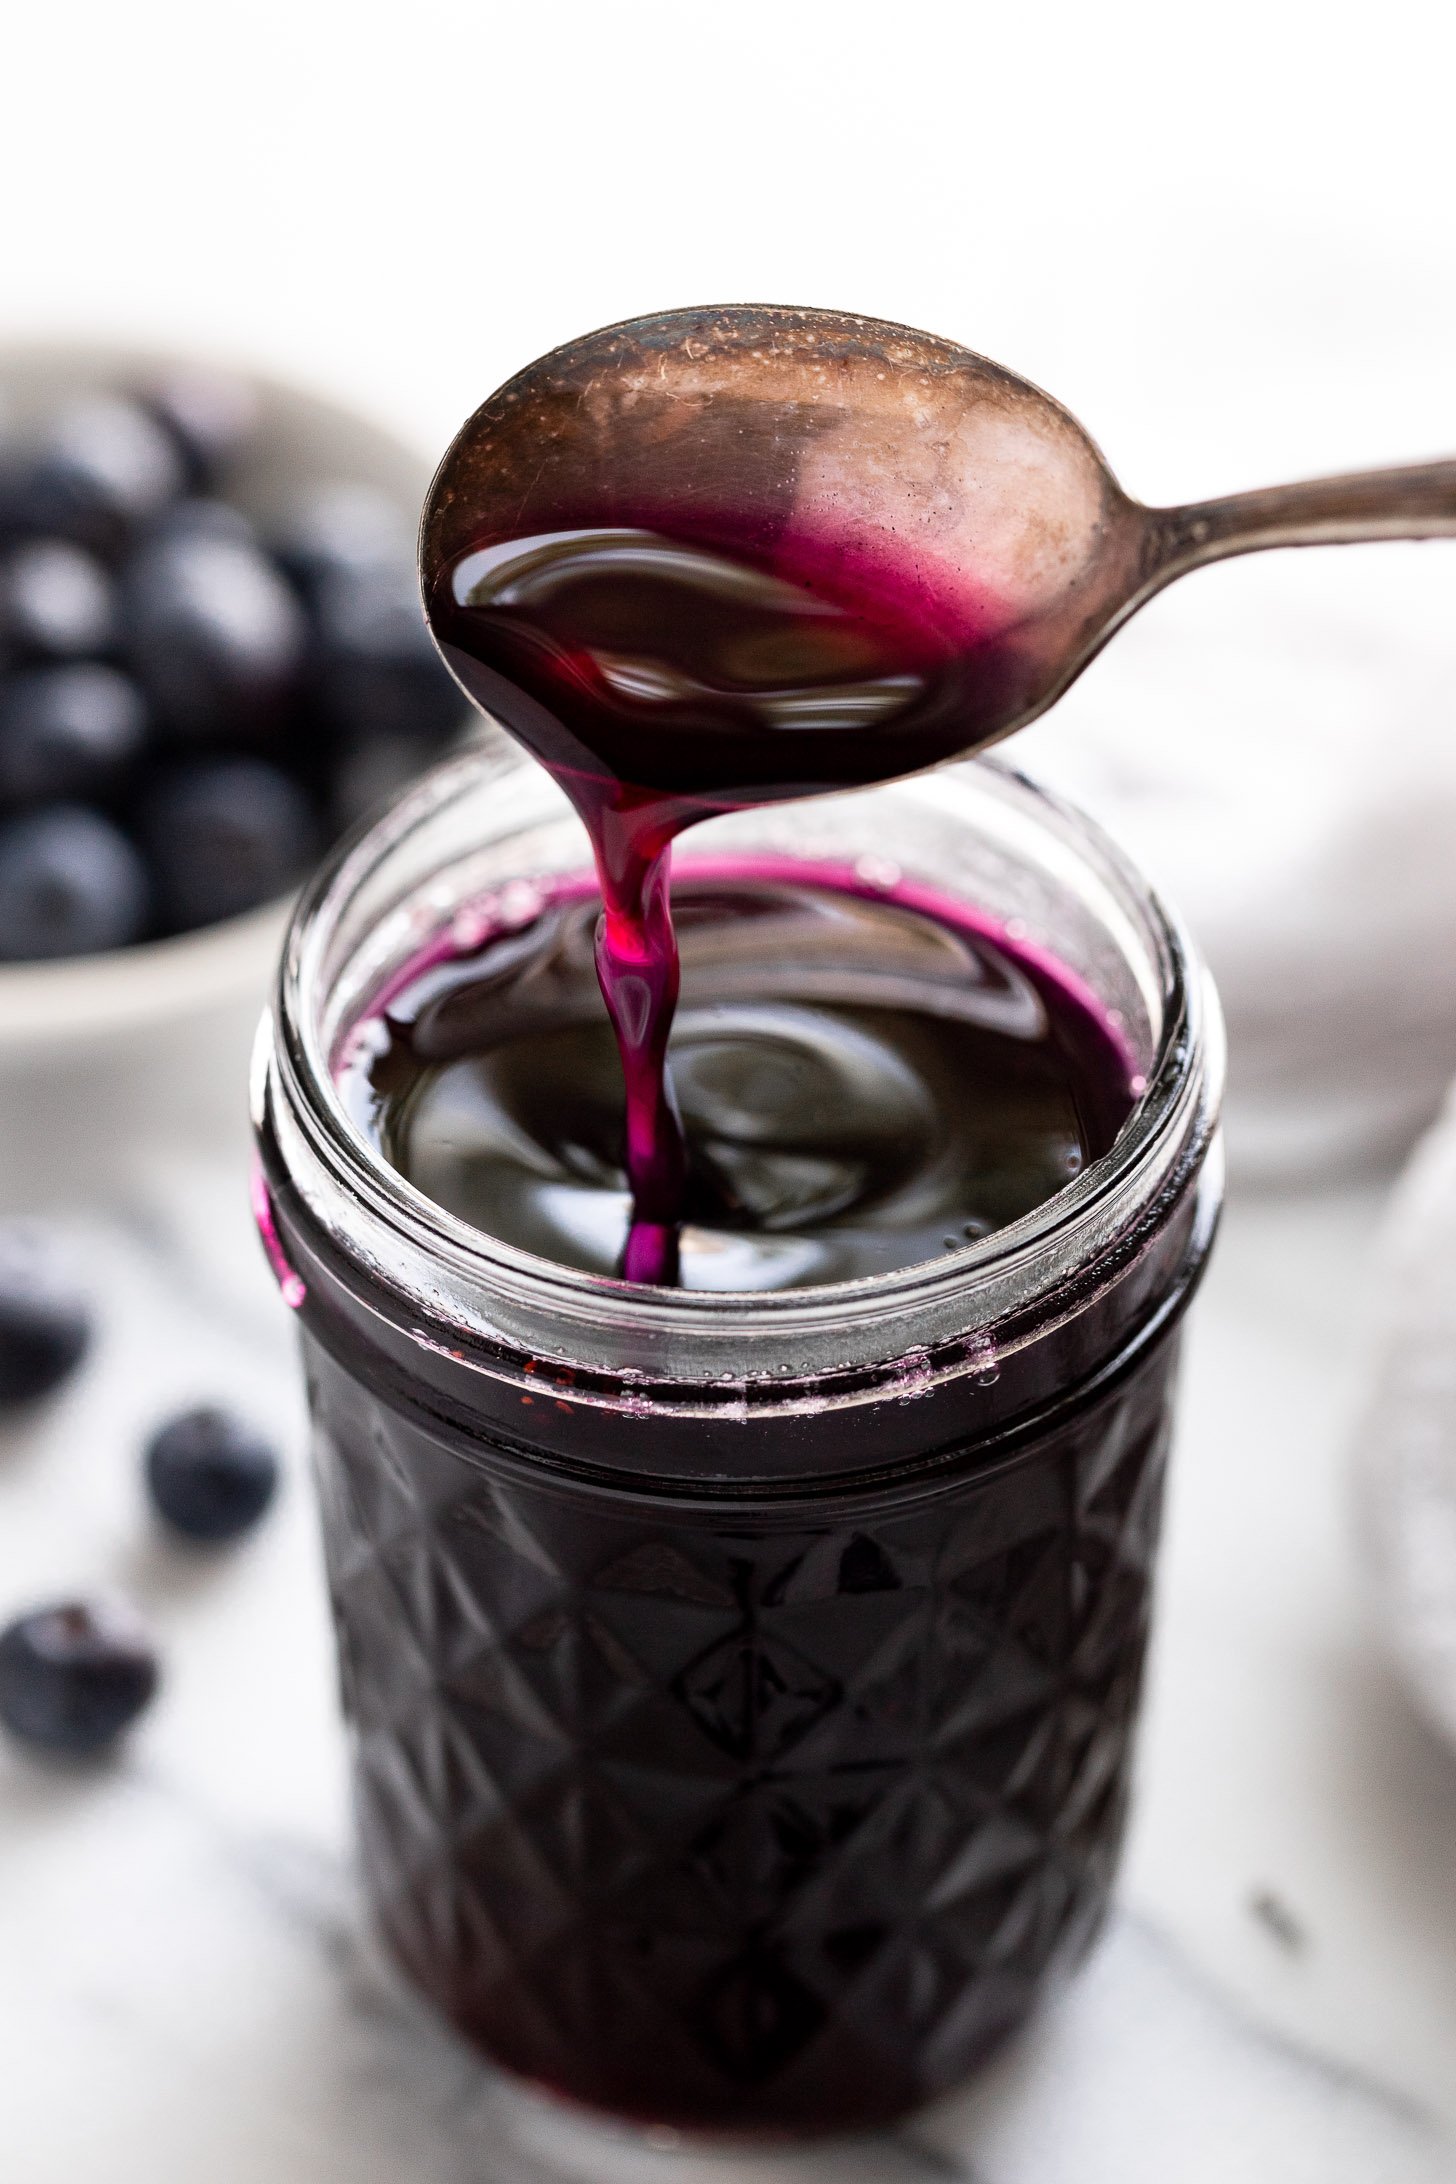 Spoon dripping blueberry syrup into jar.